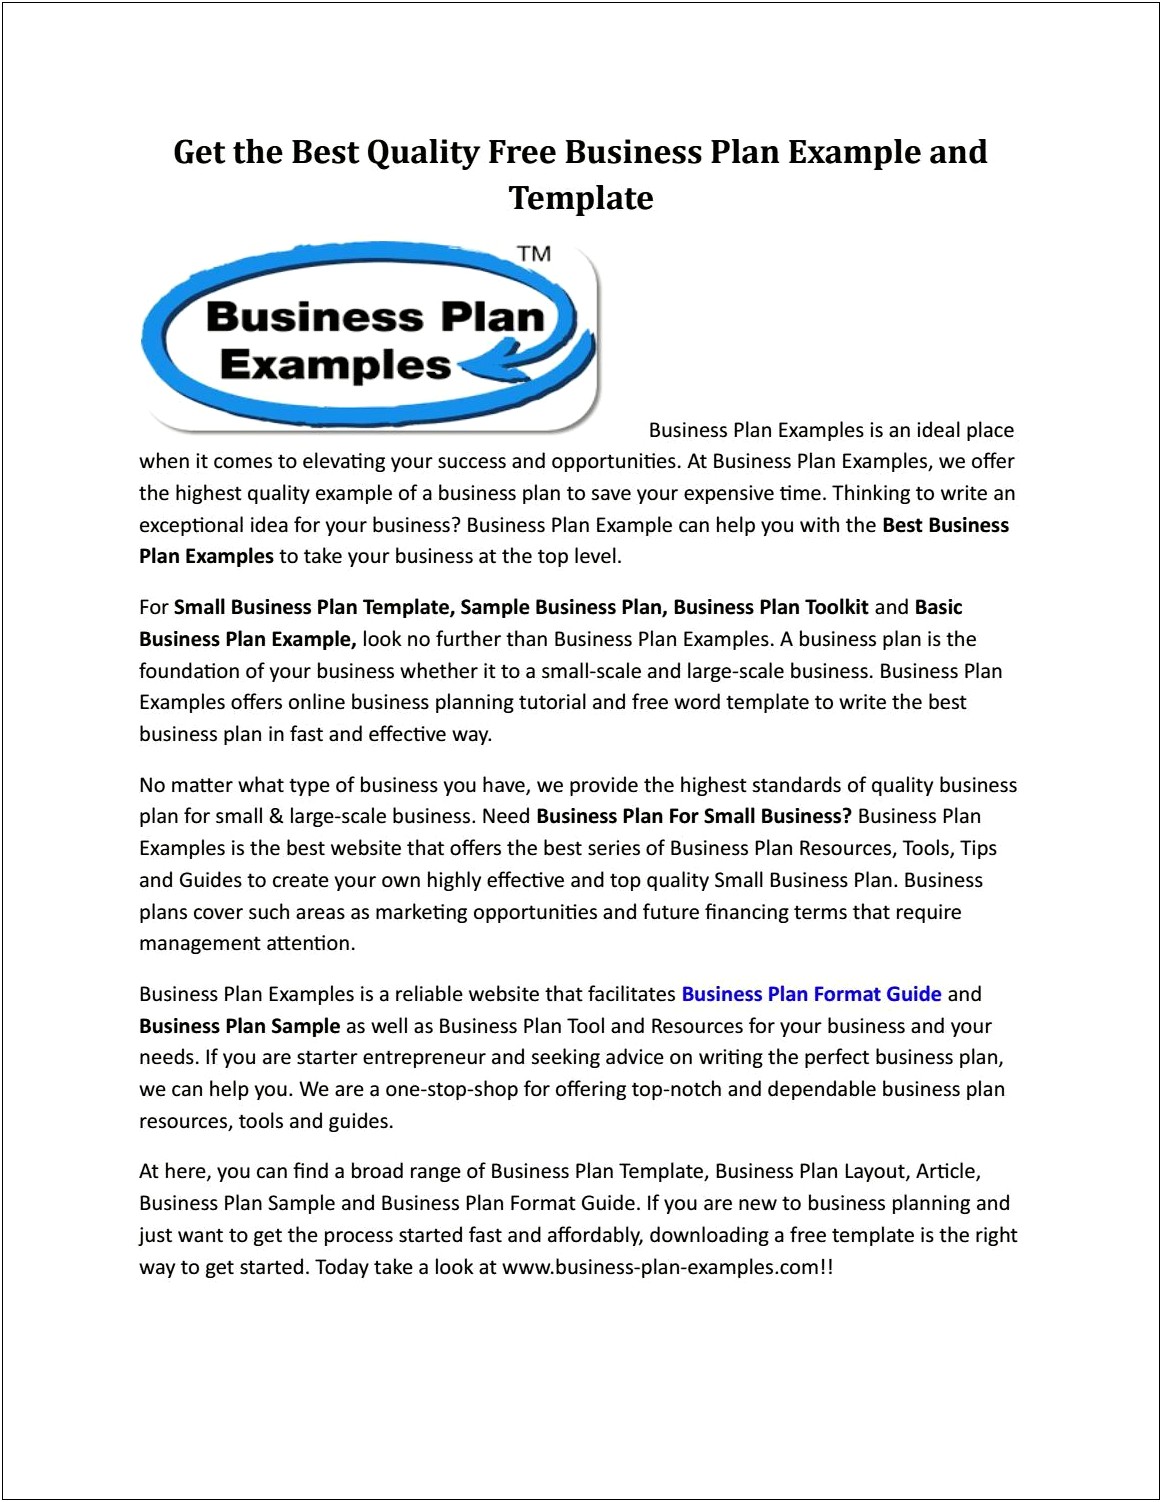 Online Store Business Plan Template Free